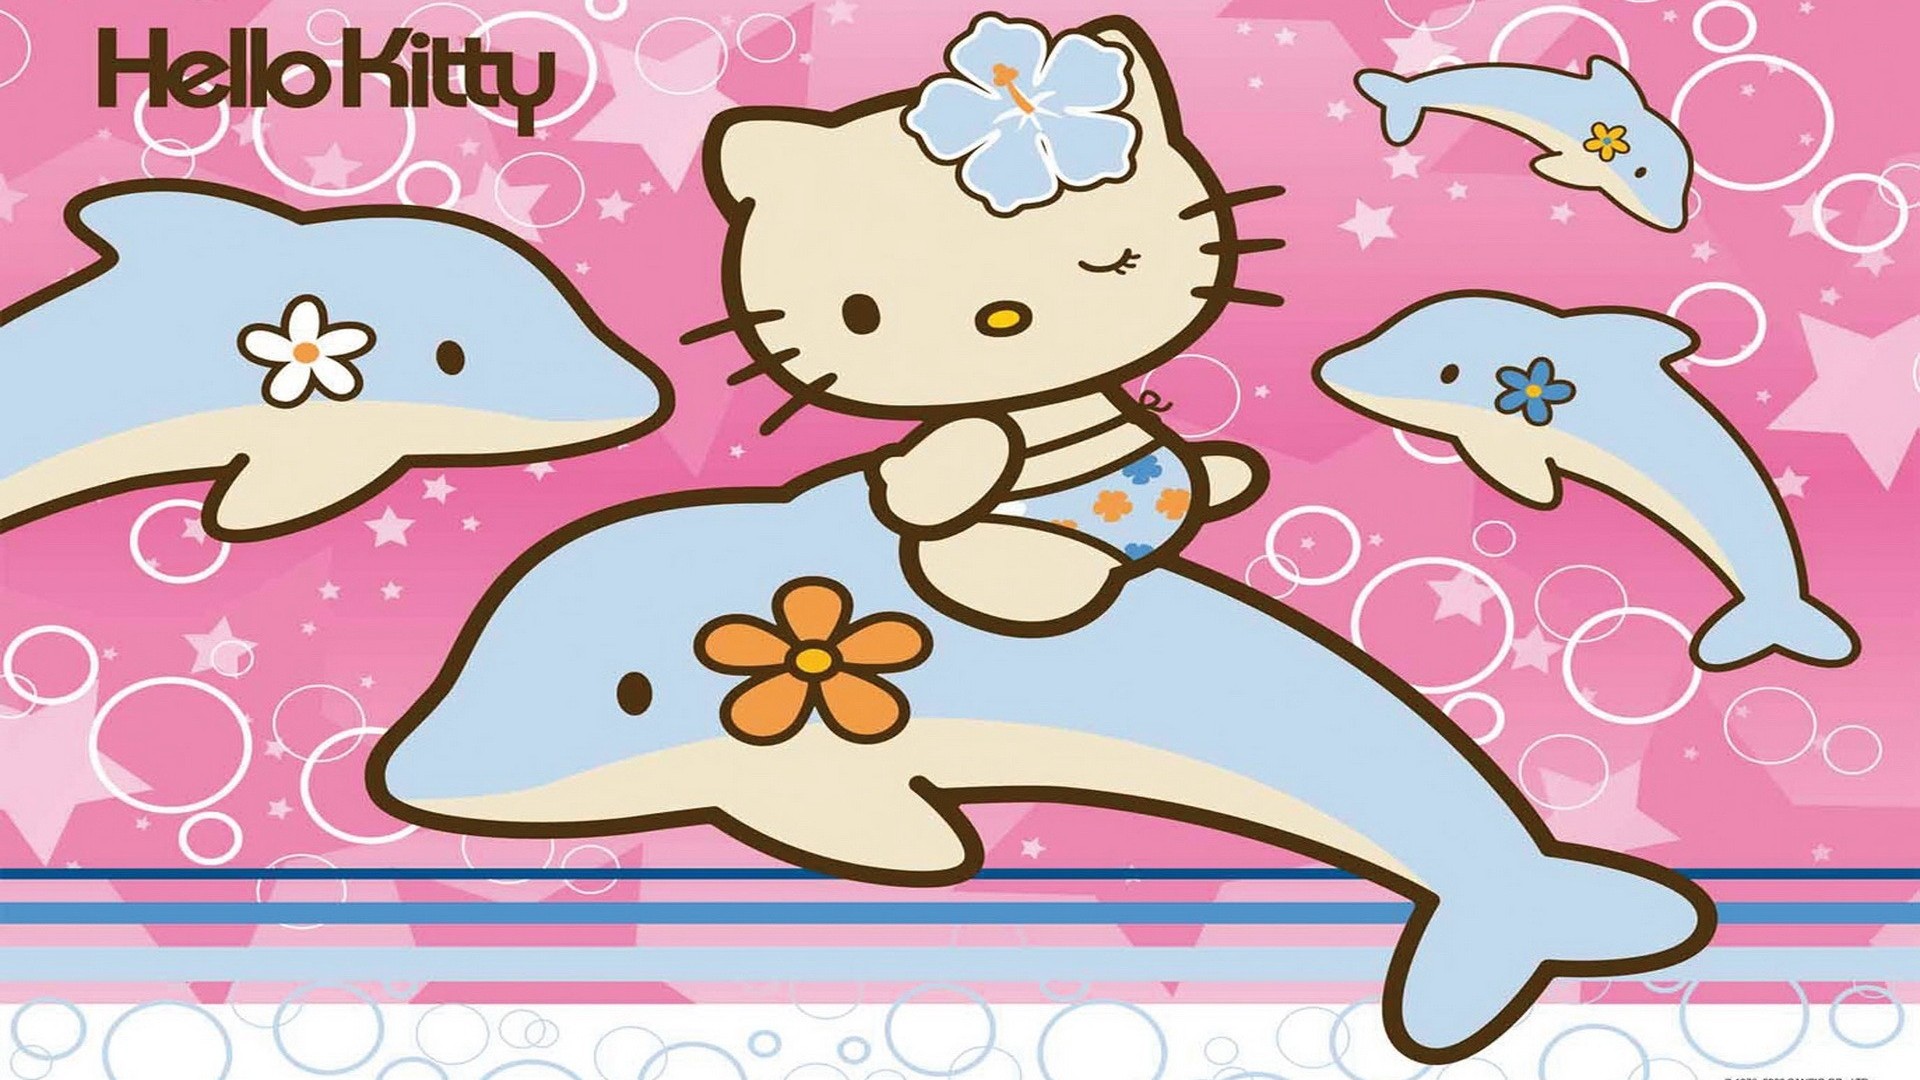 Hello Kitty Pictures HD Wallpaper With Resolution 1920X1080 pixel. You can make this wallpaper for your Desktop Computer Backgrounds, Mac Wallpapers, Android Lock screen or iPhone Screensavers